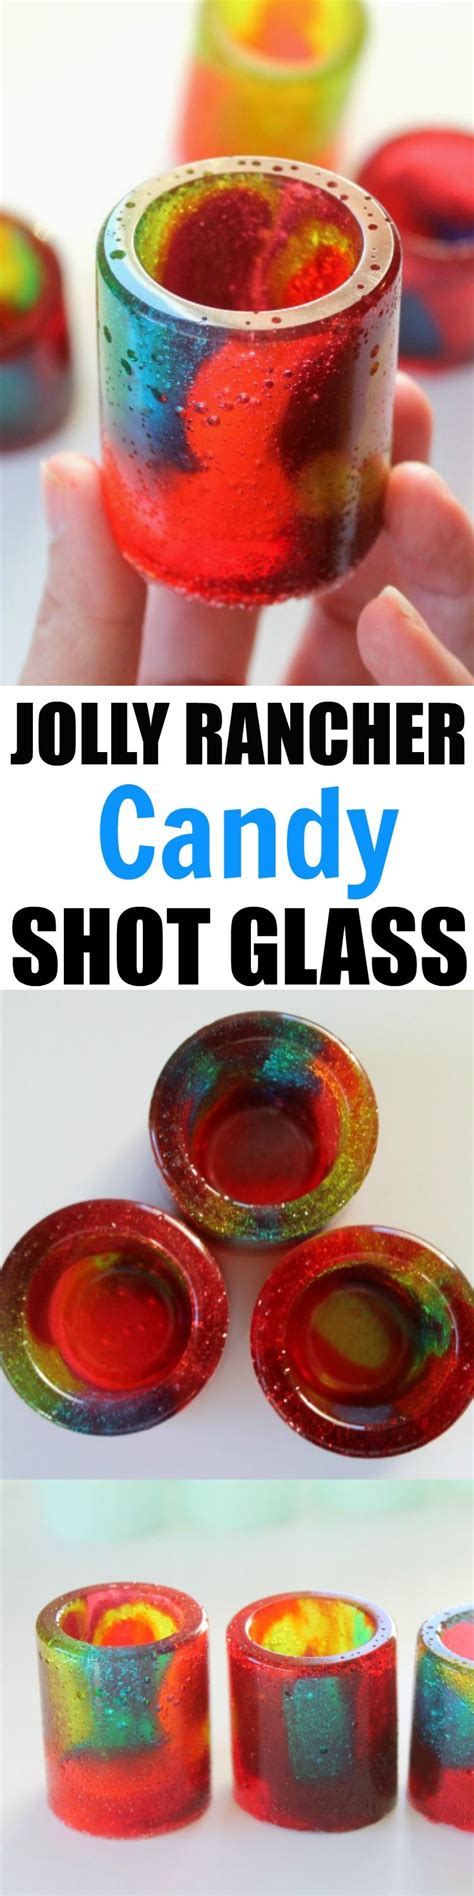 How To Make Your Own Edible Jolly Rancher Shot Glass From Home It S So Fun And Easy To Make